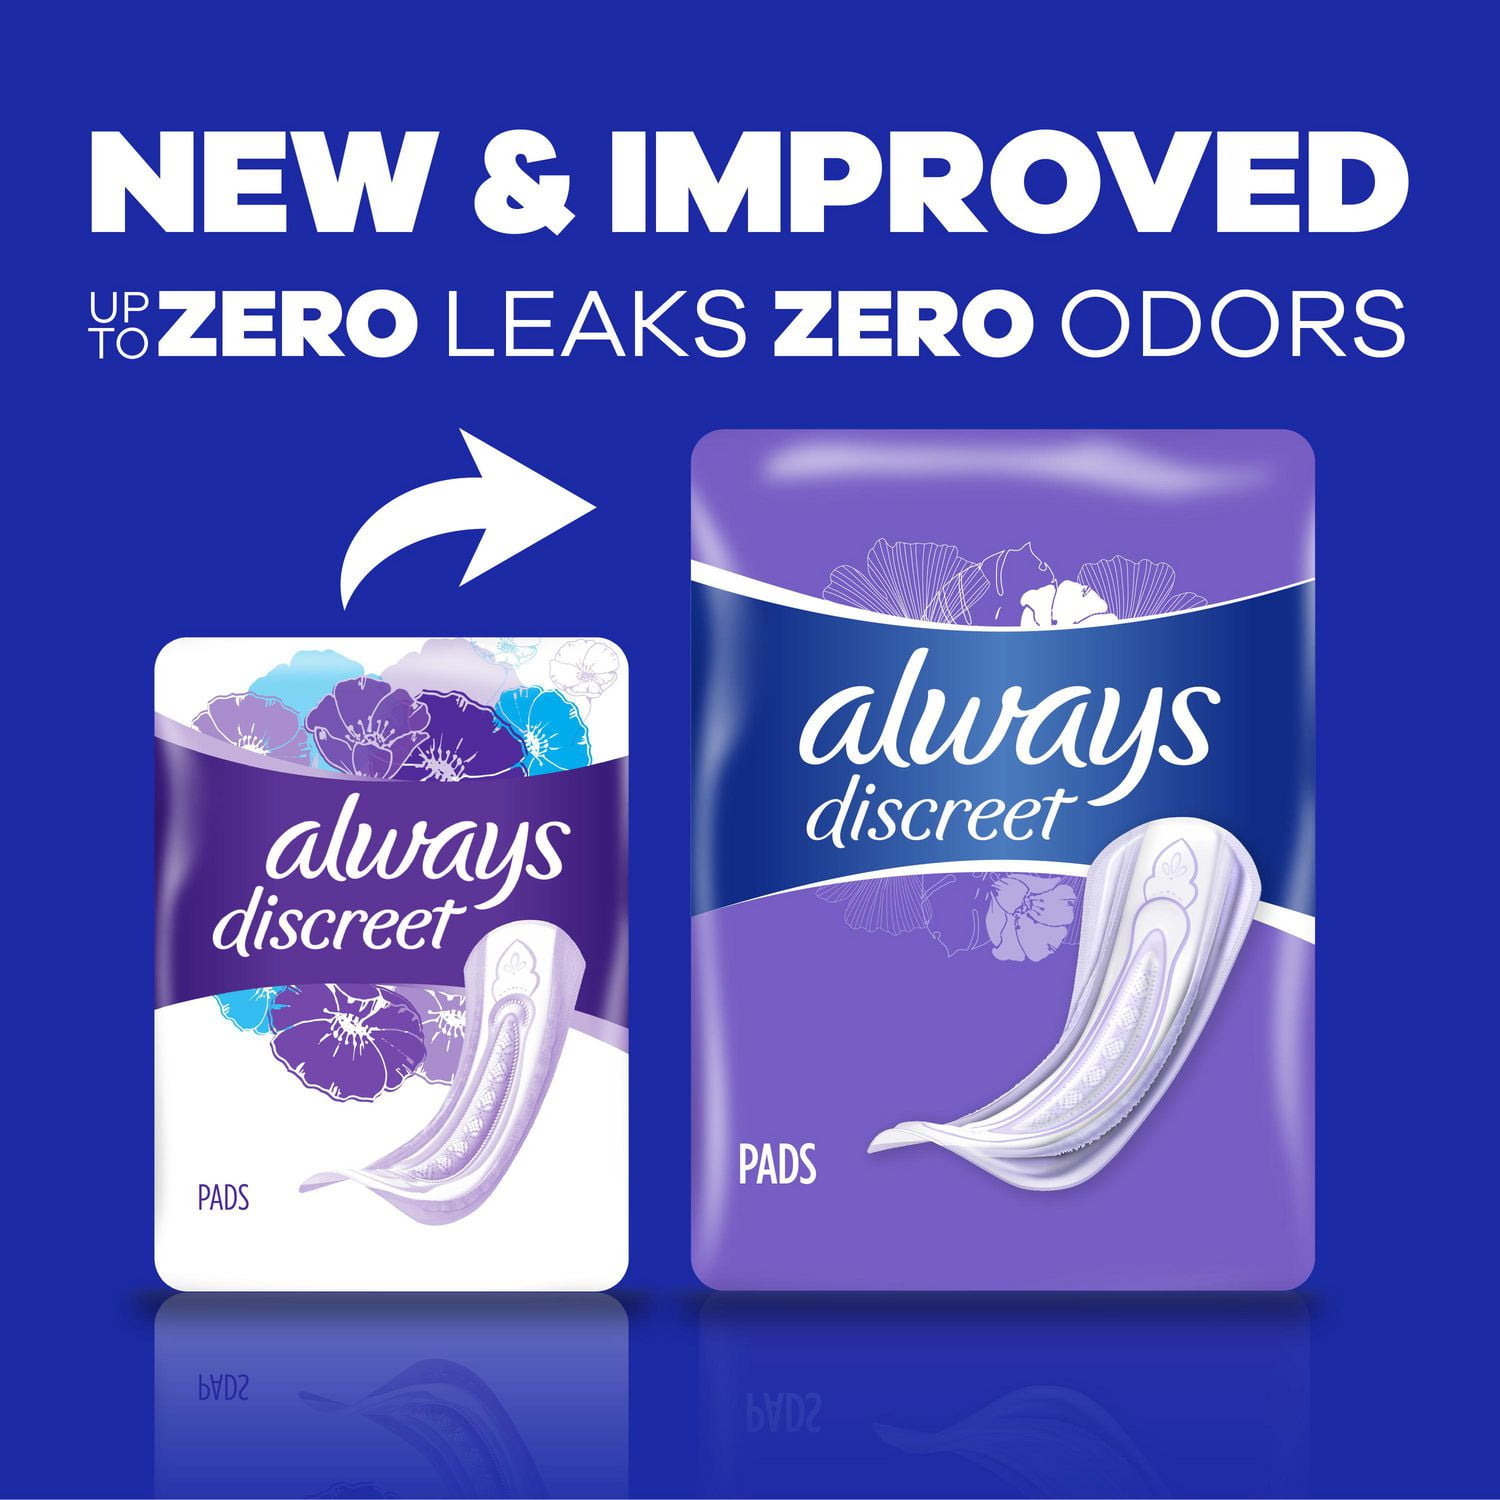 Buy Always Discreet Normal Pads Value 30 Pack Online at Chemist Warehouse®